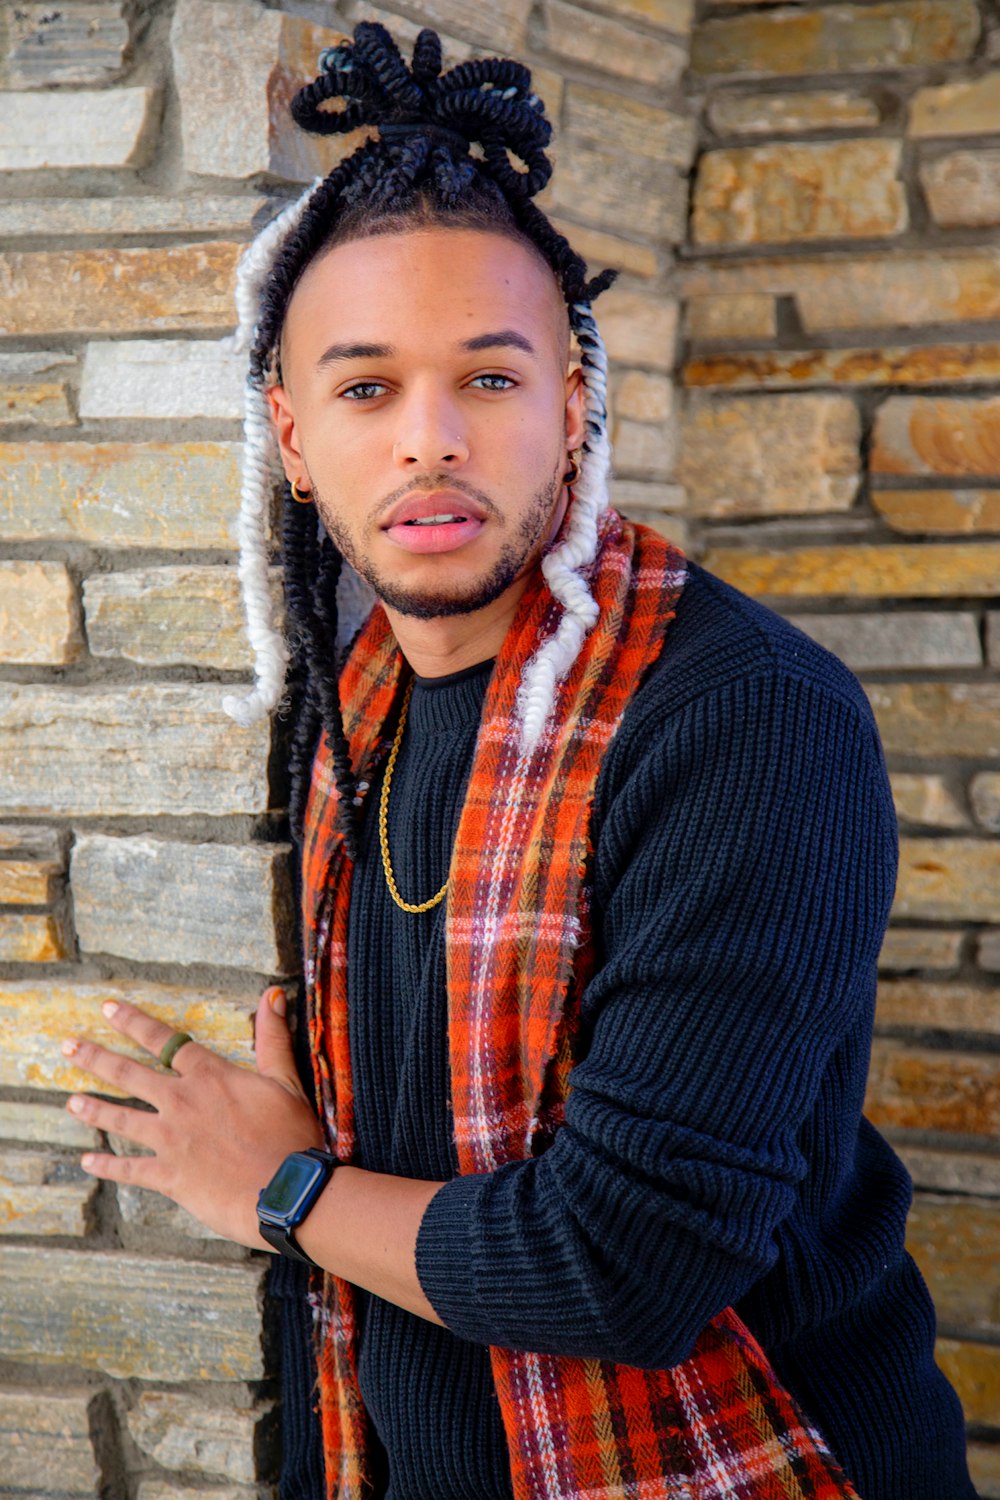 a man with dreadlocks standing in front of a brick wall